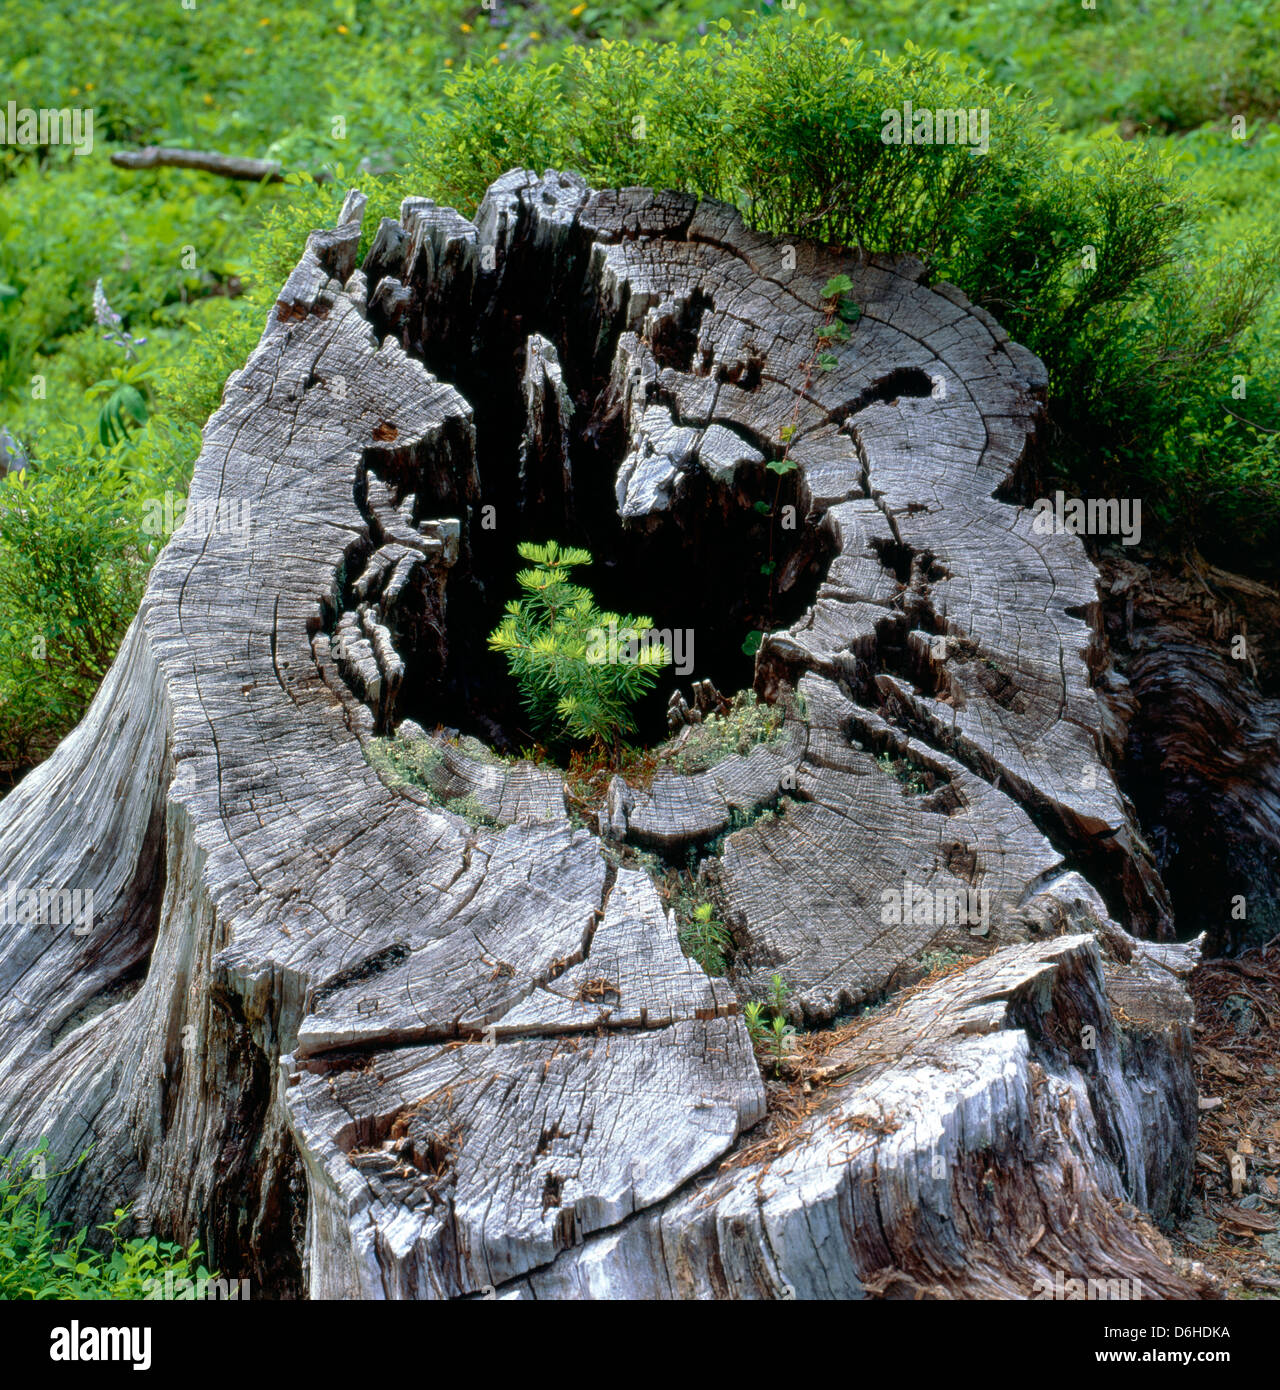 Regeneration of forest, a sapling growing in an old tree trunk, Pasayten Wilderness, Pacific Crest Trail, North Cascades, WA Stock Photo